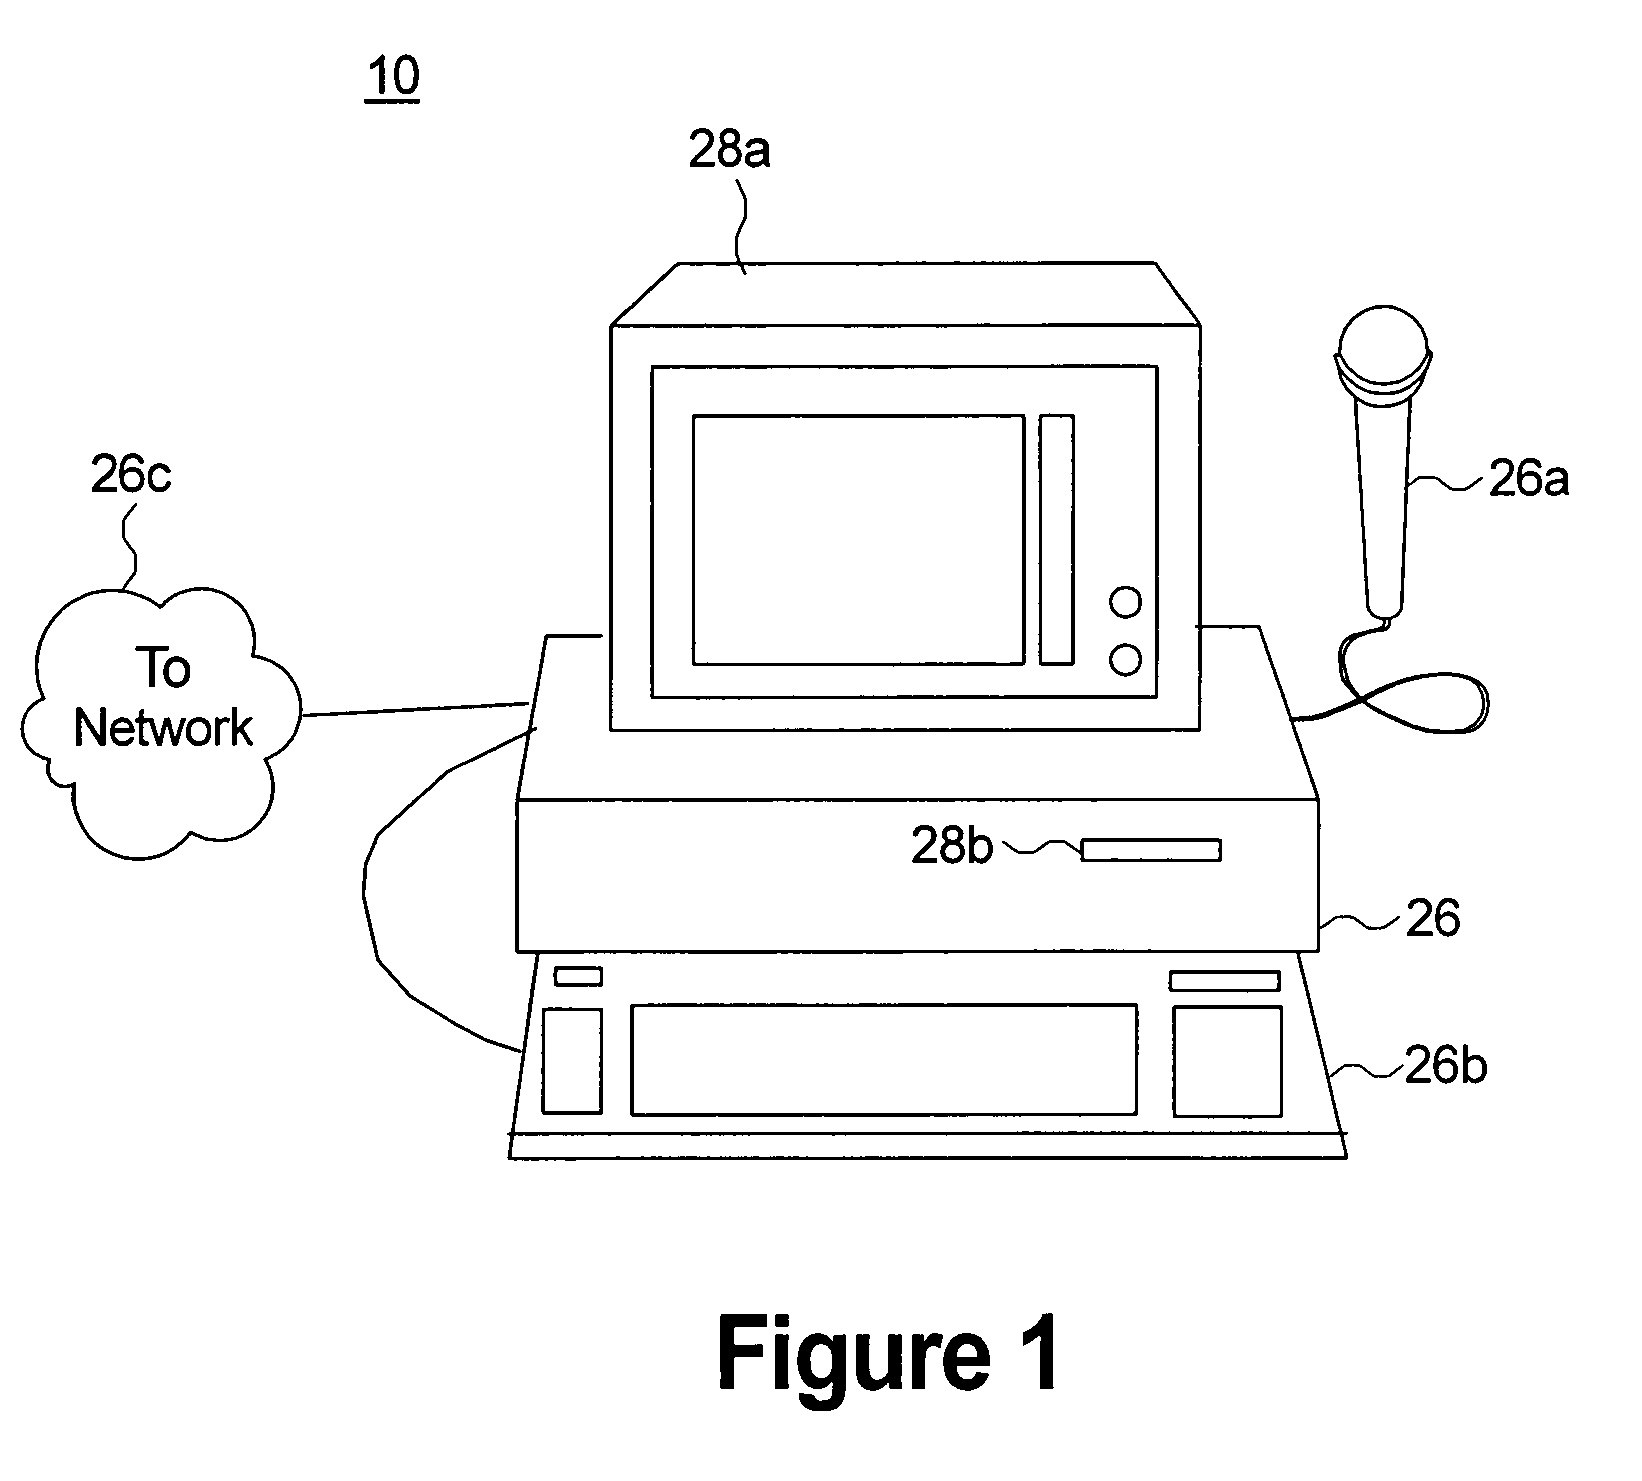 Method and apparatus for synchronization of text and audio data